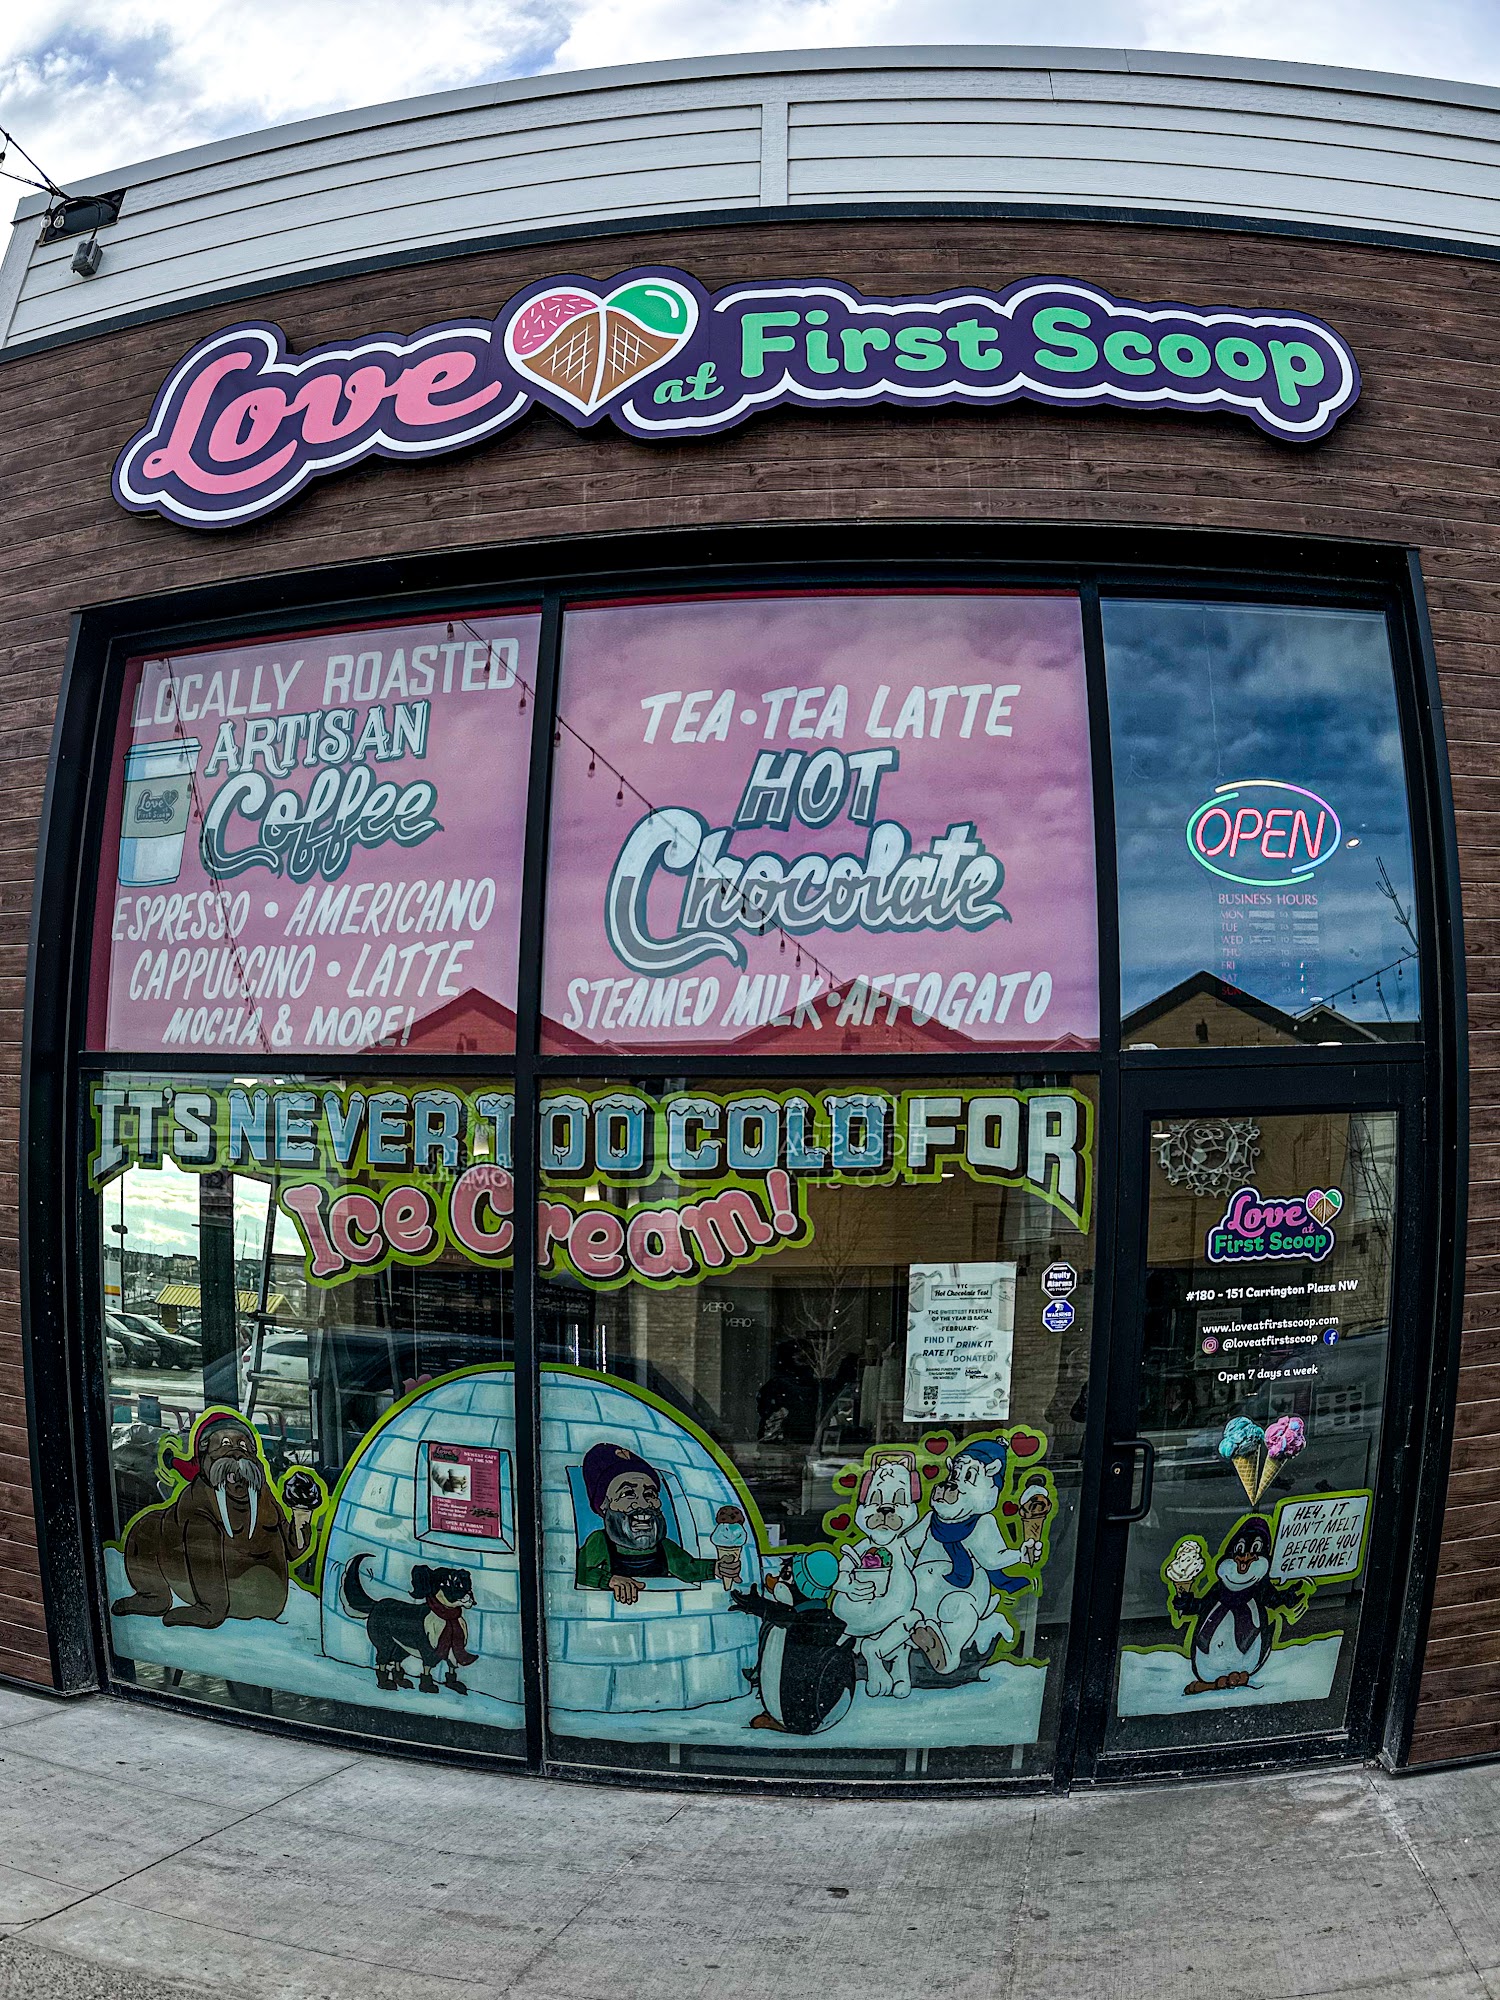 Love at First Scoop & Coffee